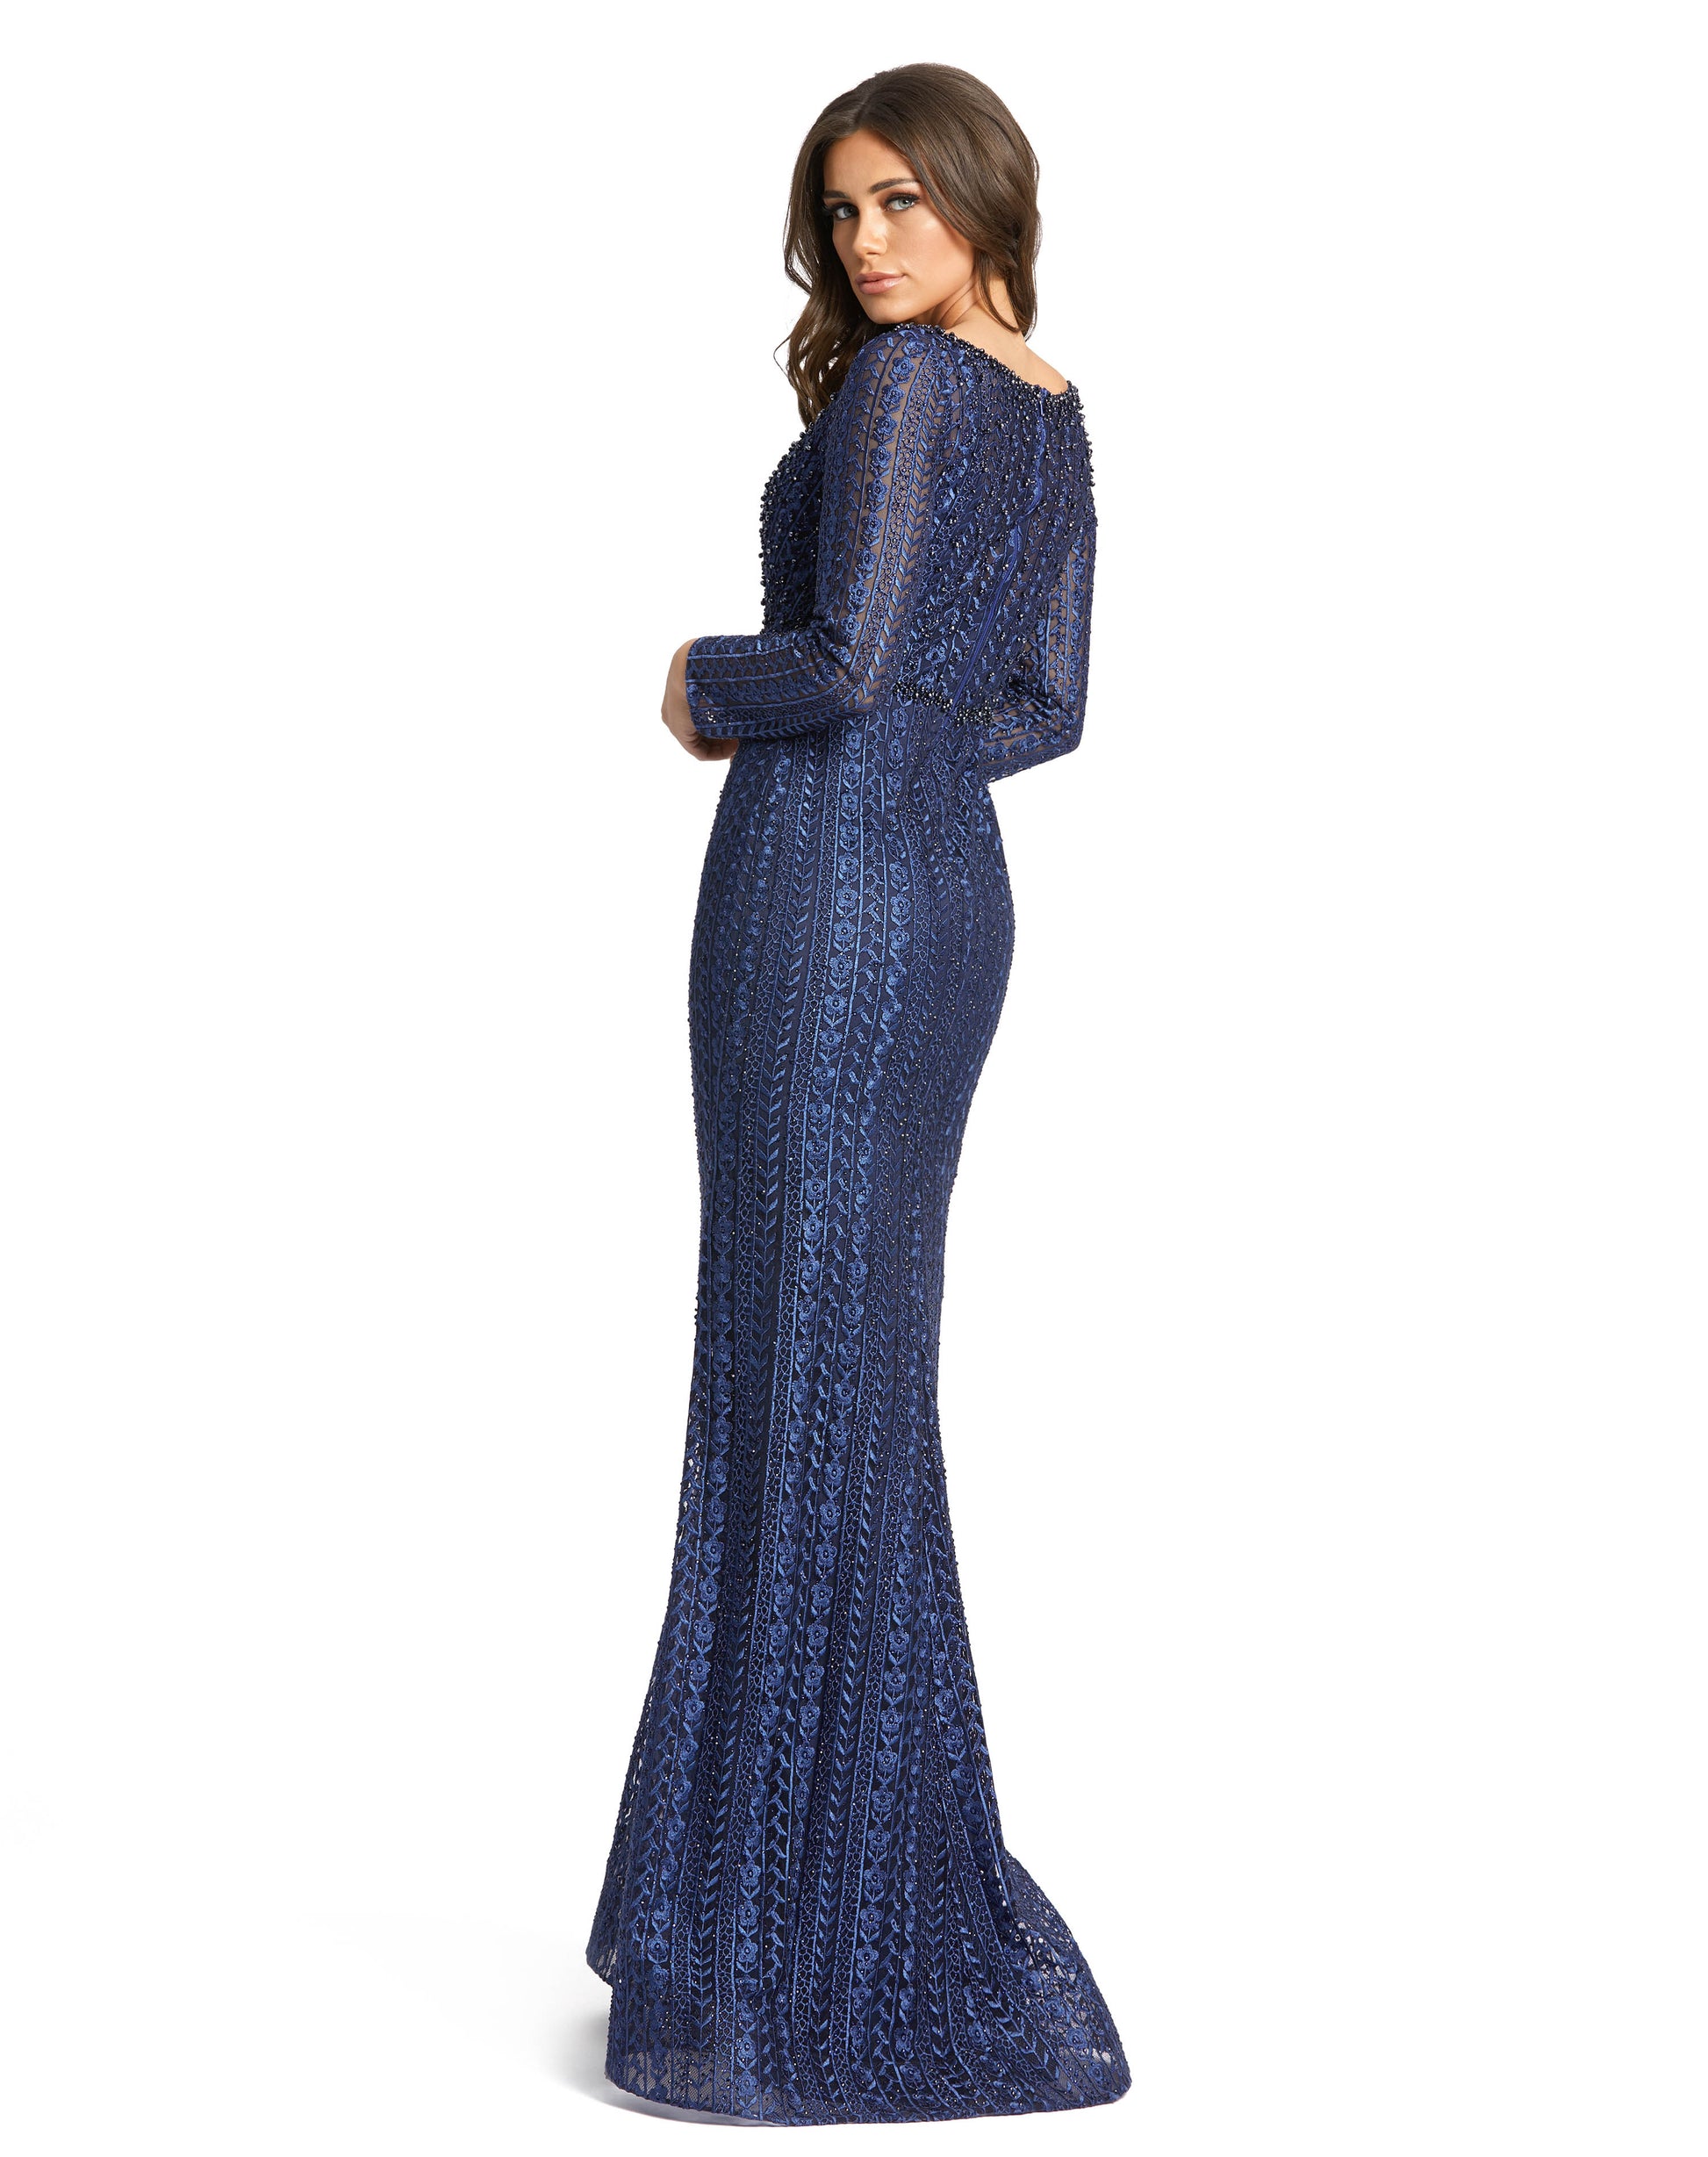 Mac Duggal Sheer embellished embroidered overlay; 100% polyester lining Fully lined through bodice and skirt; sheer unlined long sleeves V-neckline Long sleeves Beaded waist detail Sweeping train Concealed back zipper Approx. 62.5" from top of shoulder to